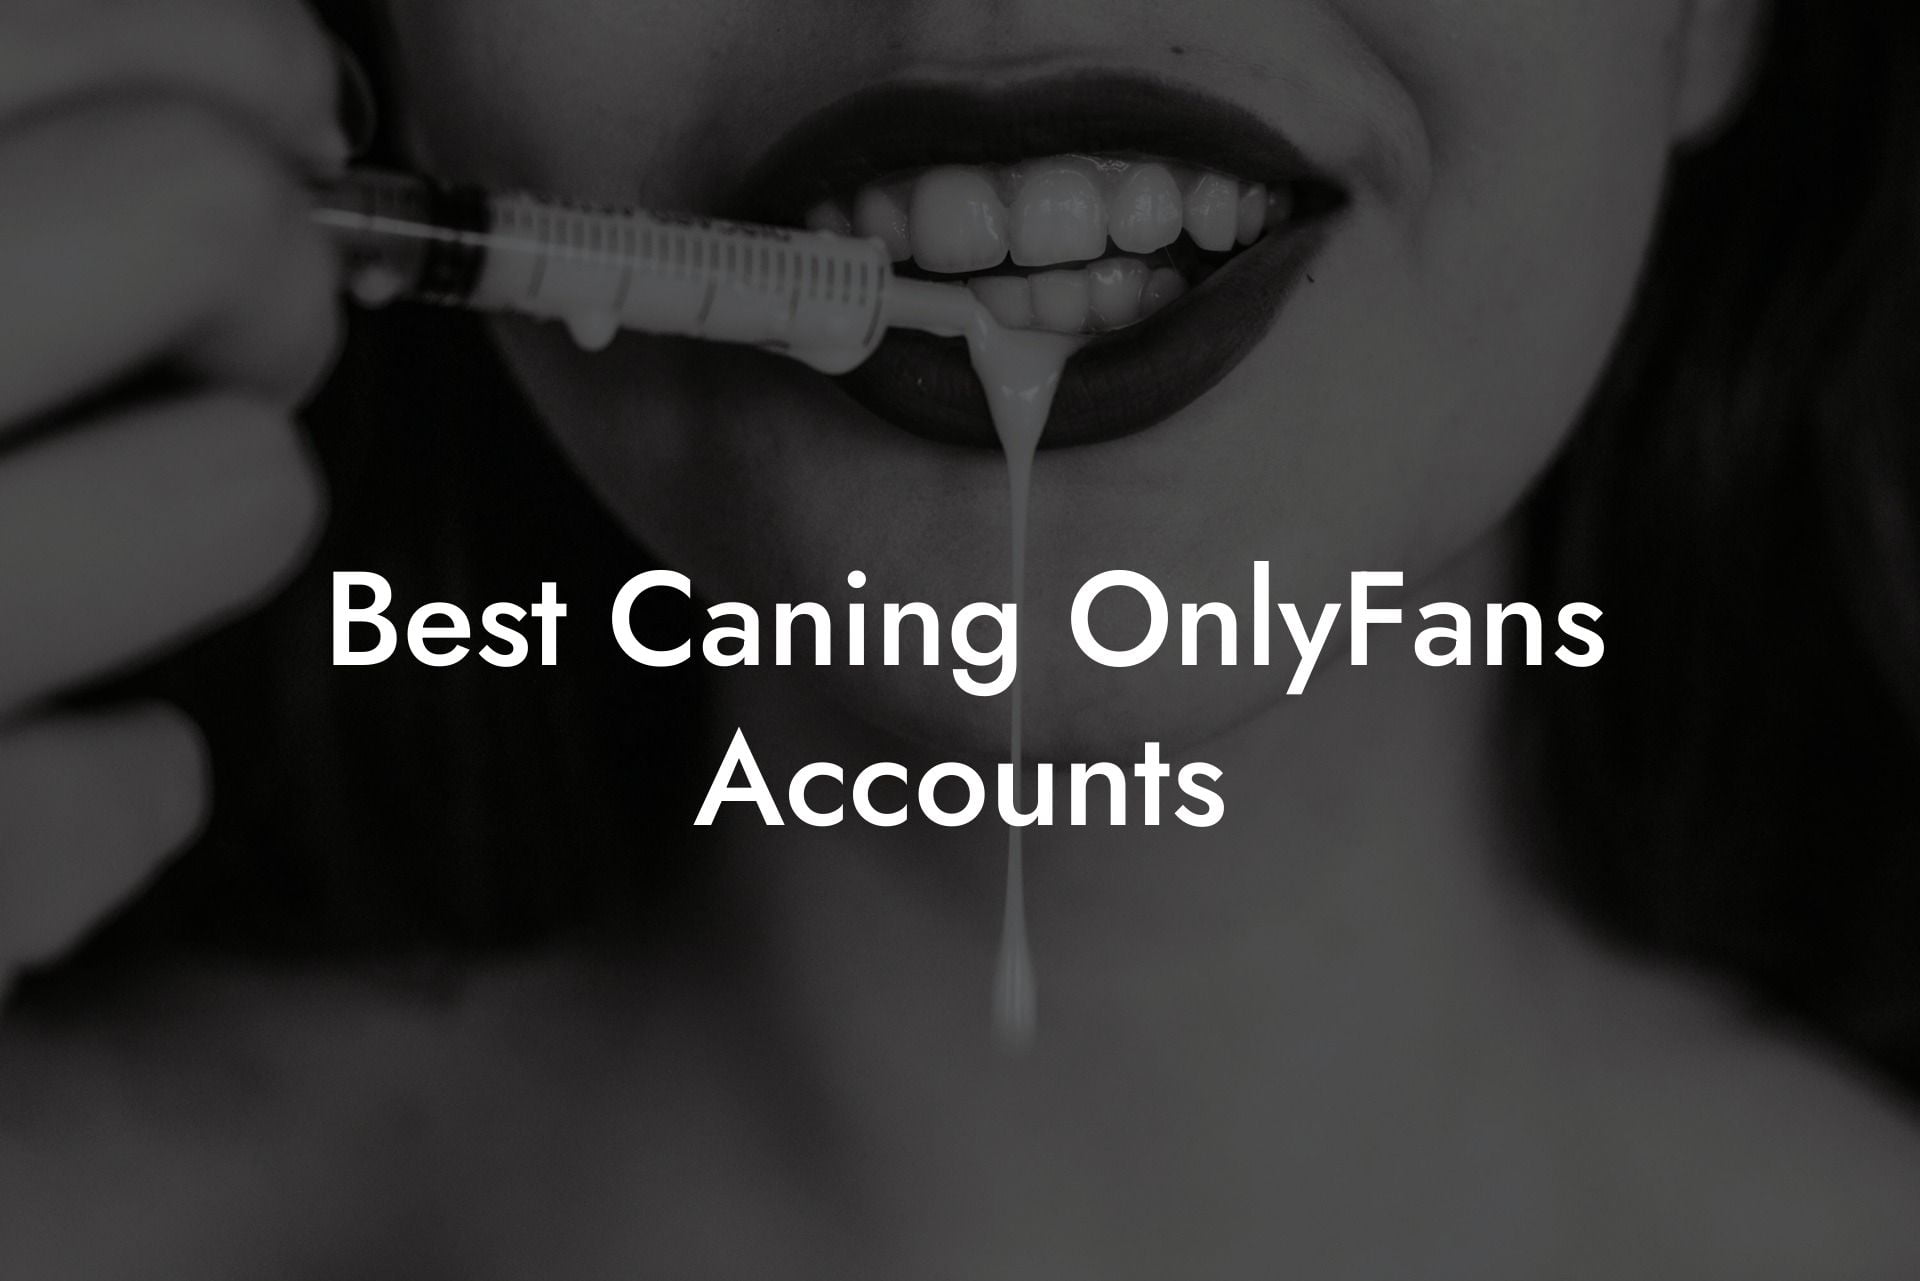 Best Caning OnlyFans Accounts